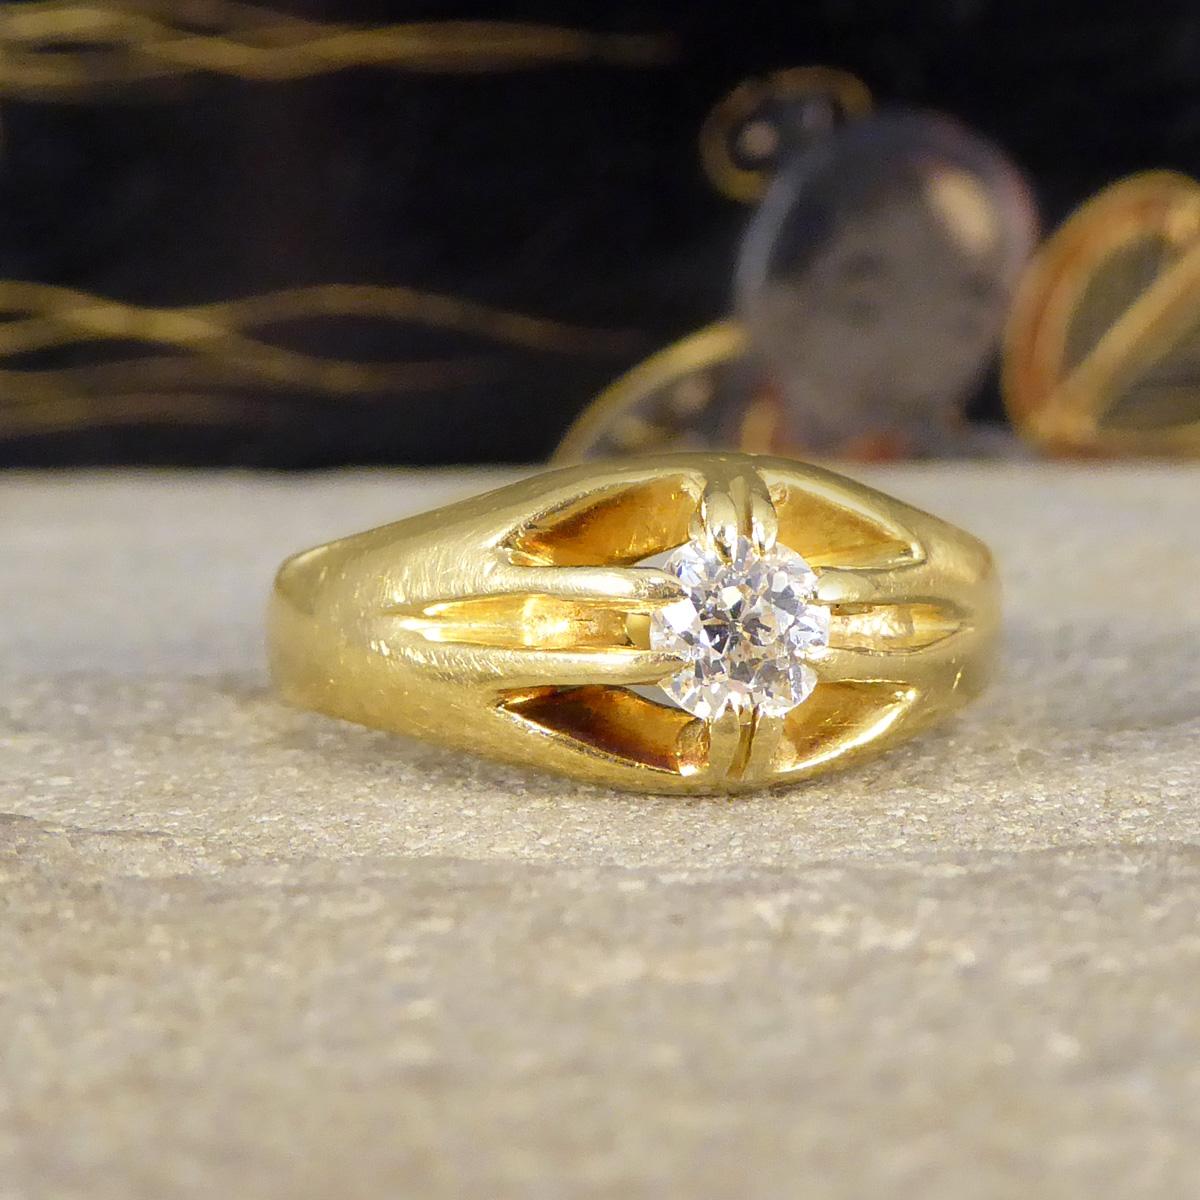 Step into the romance of the past with our Late Victorian Old Cushion Cut Diamond Gypsy Set Ring. This exquisite piece is a beautiful representation of Victorian era craftsmanship, made in luxurious 18ct yellow gold. It features a classic gypsy